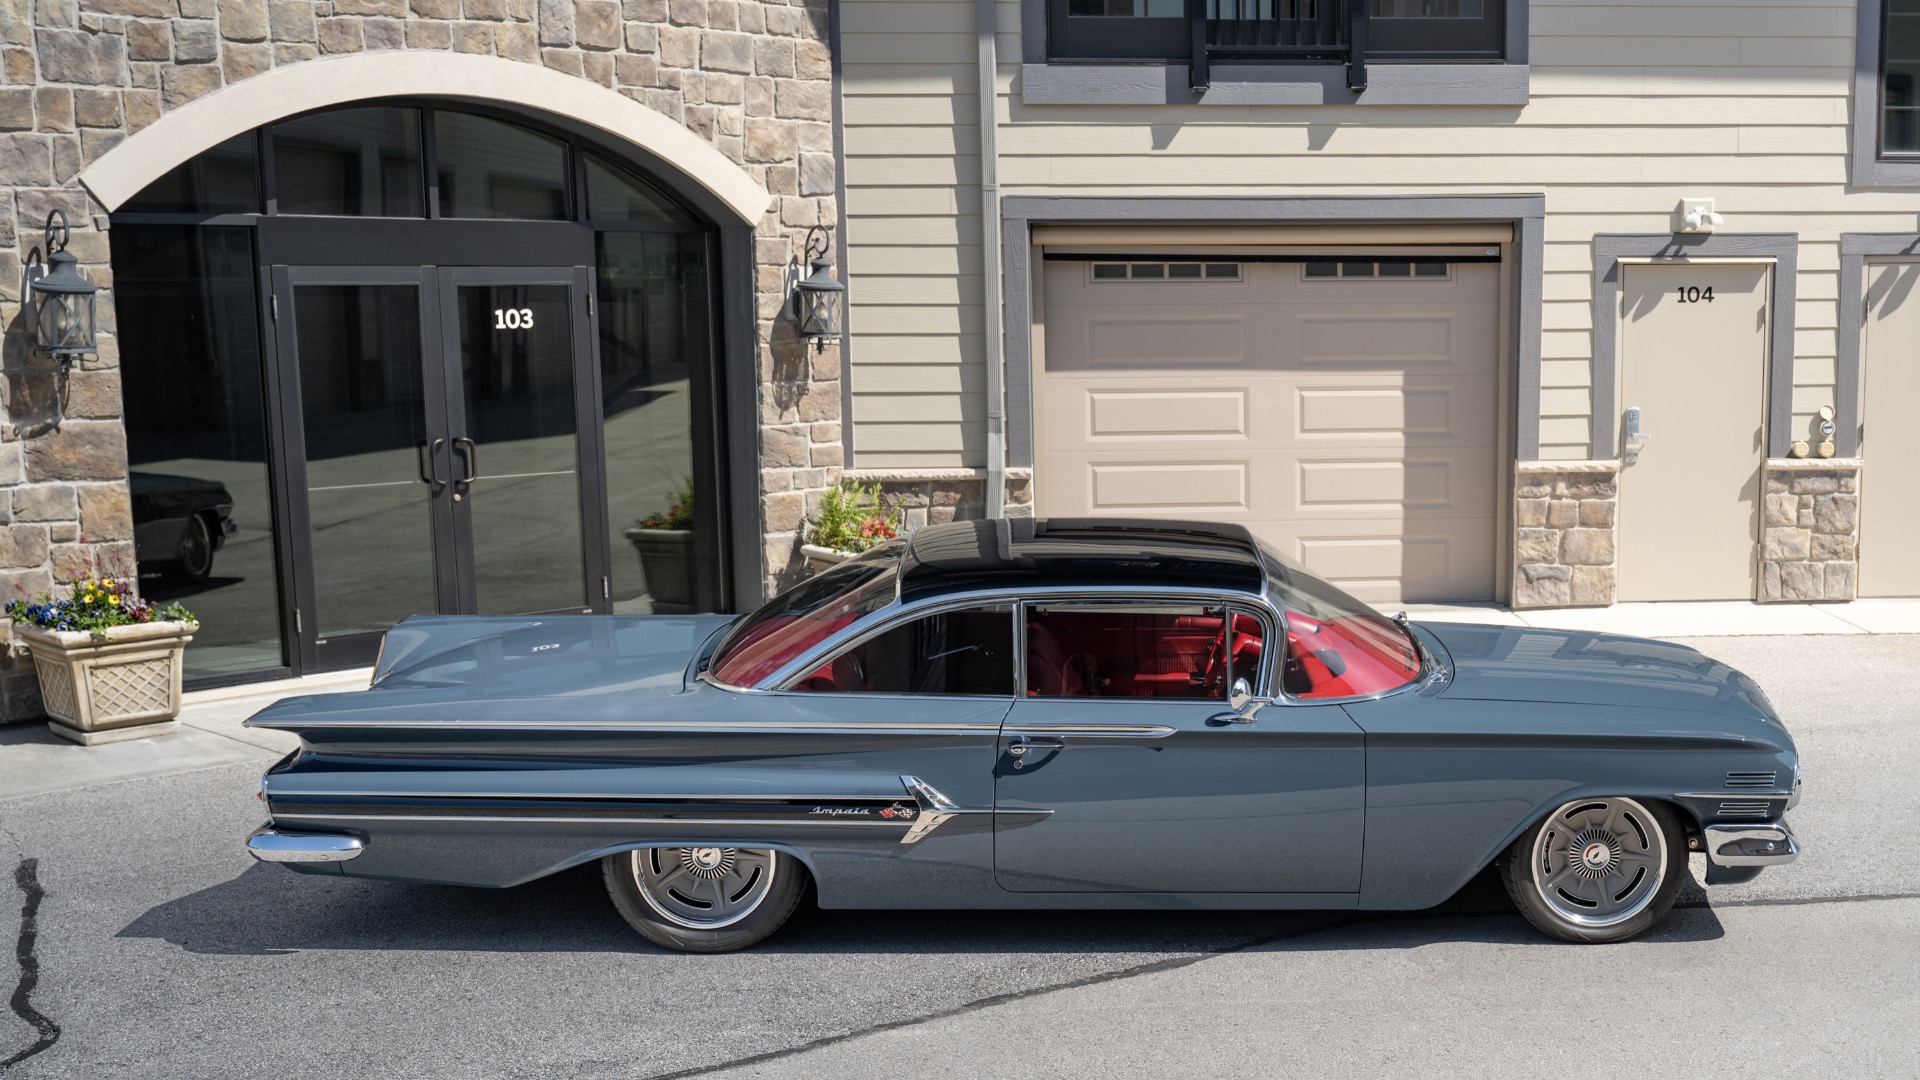 Used-1960-Chevrolet-Impala-George-Poteet-Full-Rotisserie-Build-Roadster-Shop-Chassis-The-BEST-Build